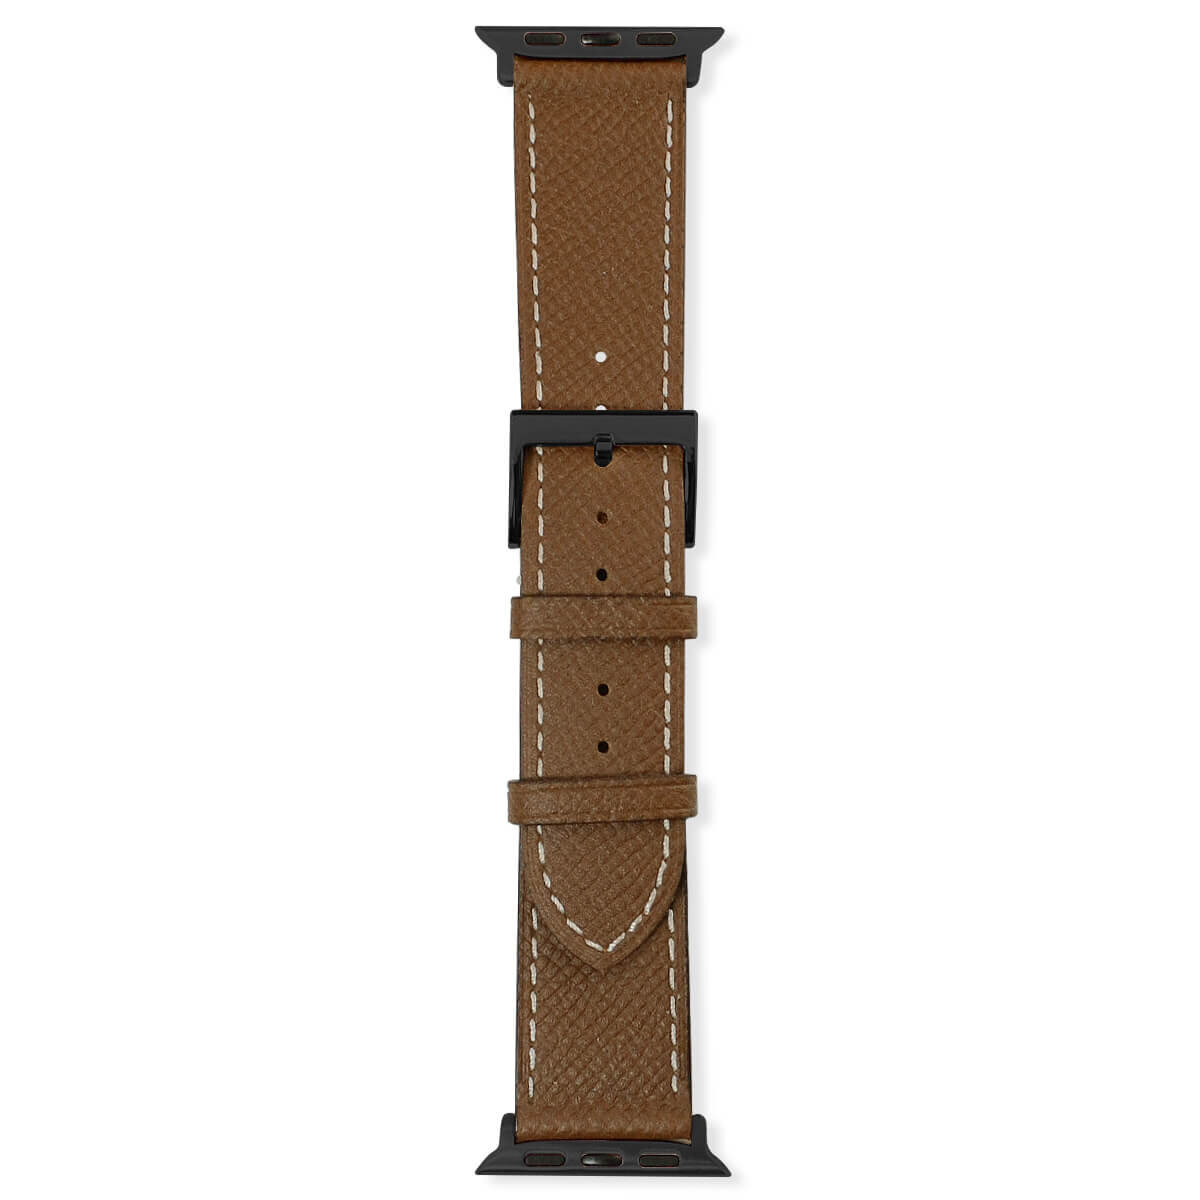 38mm/40mm/41mm Apple Watch Strap | Calf Leather Band (Coffee)